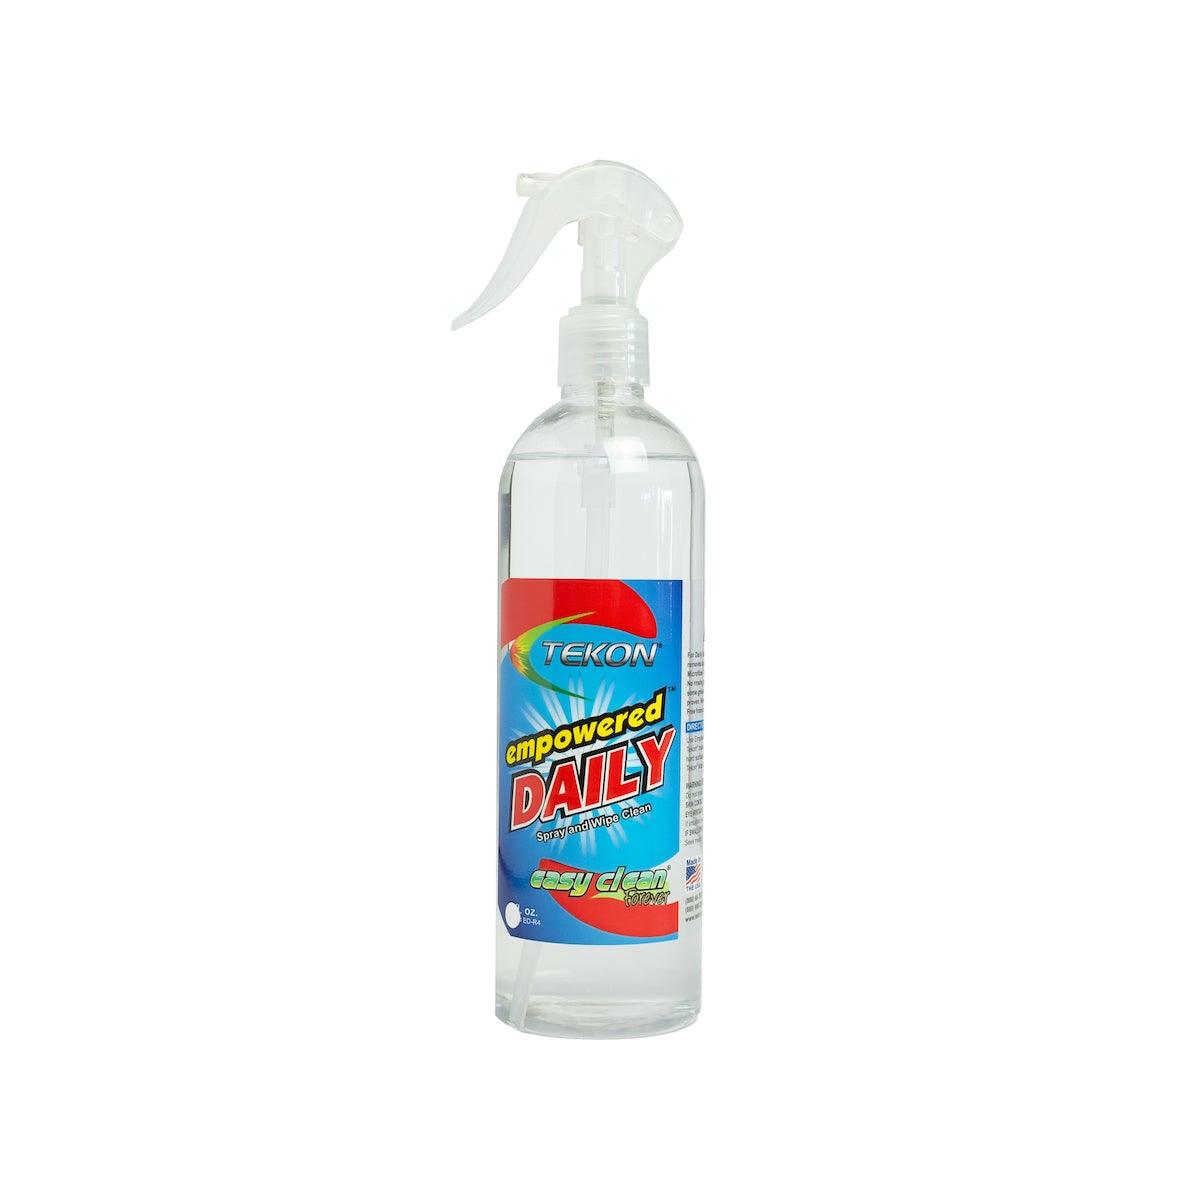 Empowered Daily - General Purpose Cleaner - TEKON